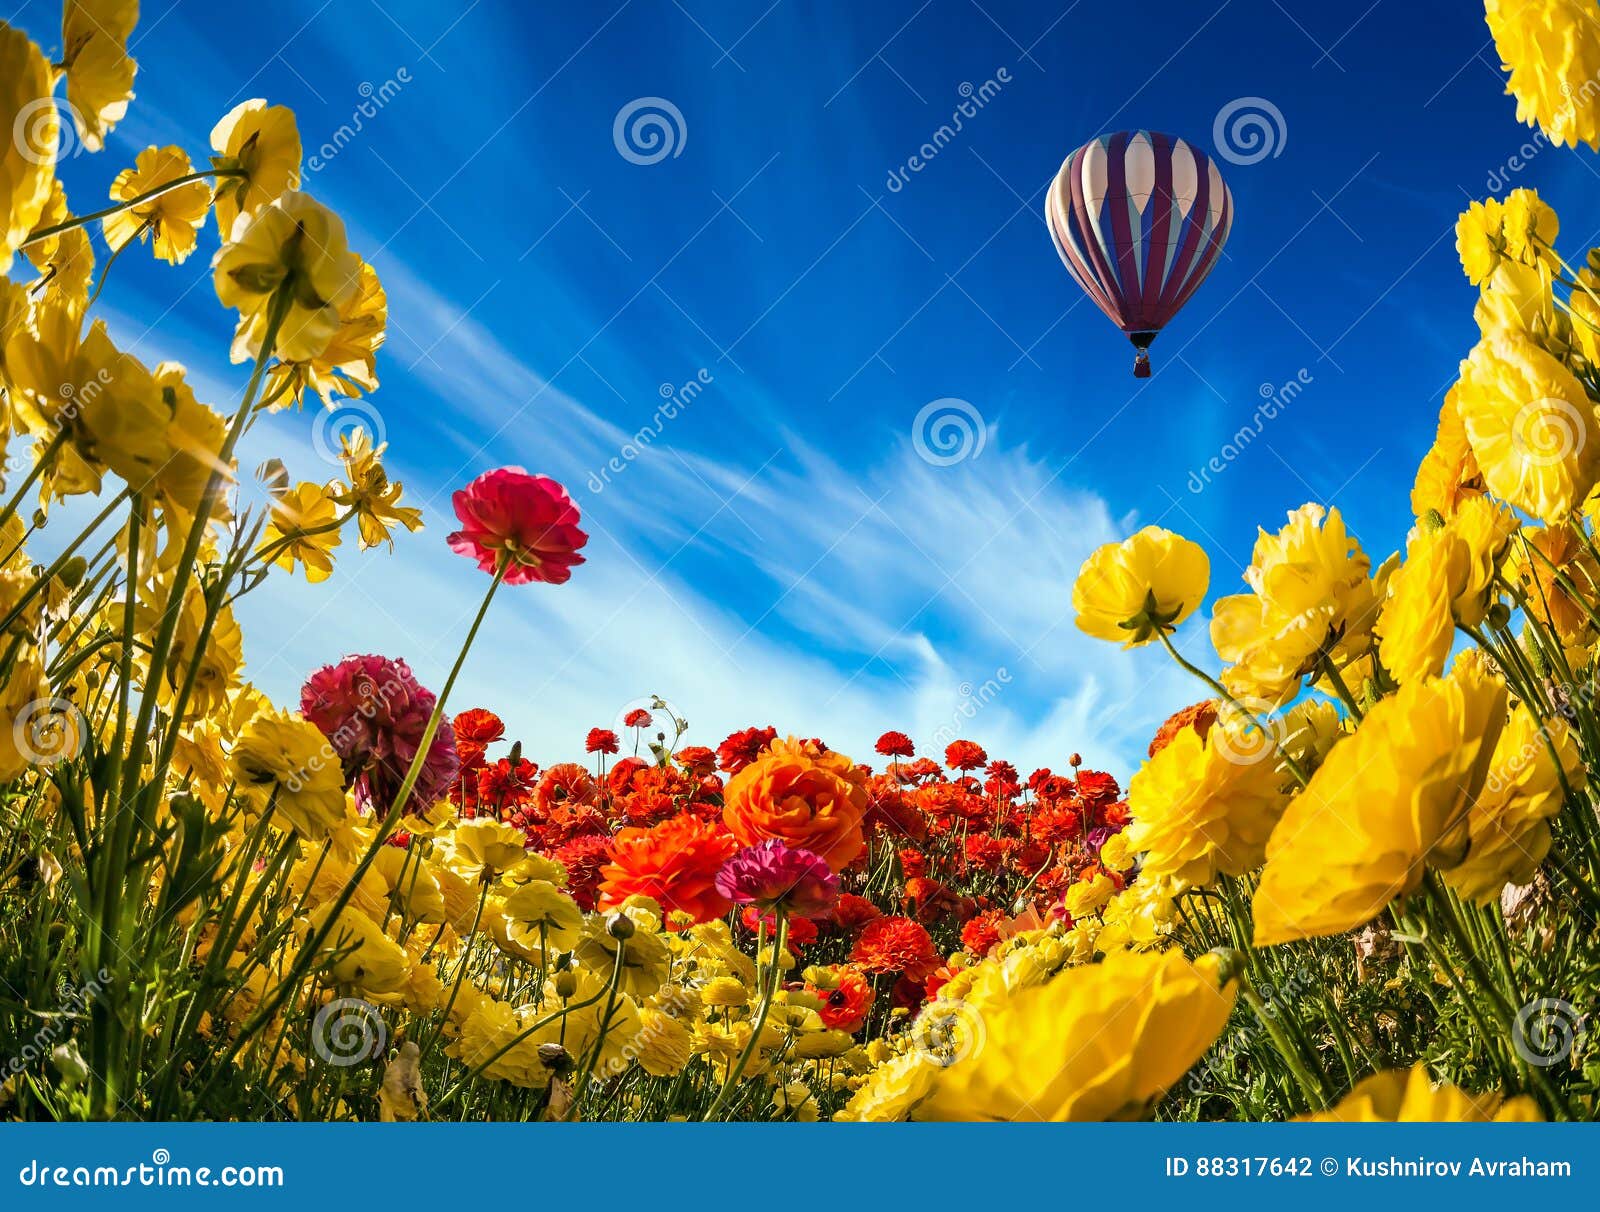 Neverland Flowers and Balloon. Collage Stock Photo - Image of scene ...